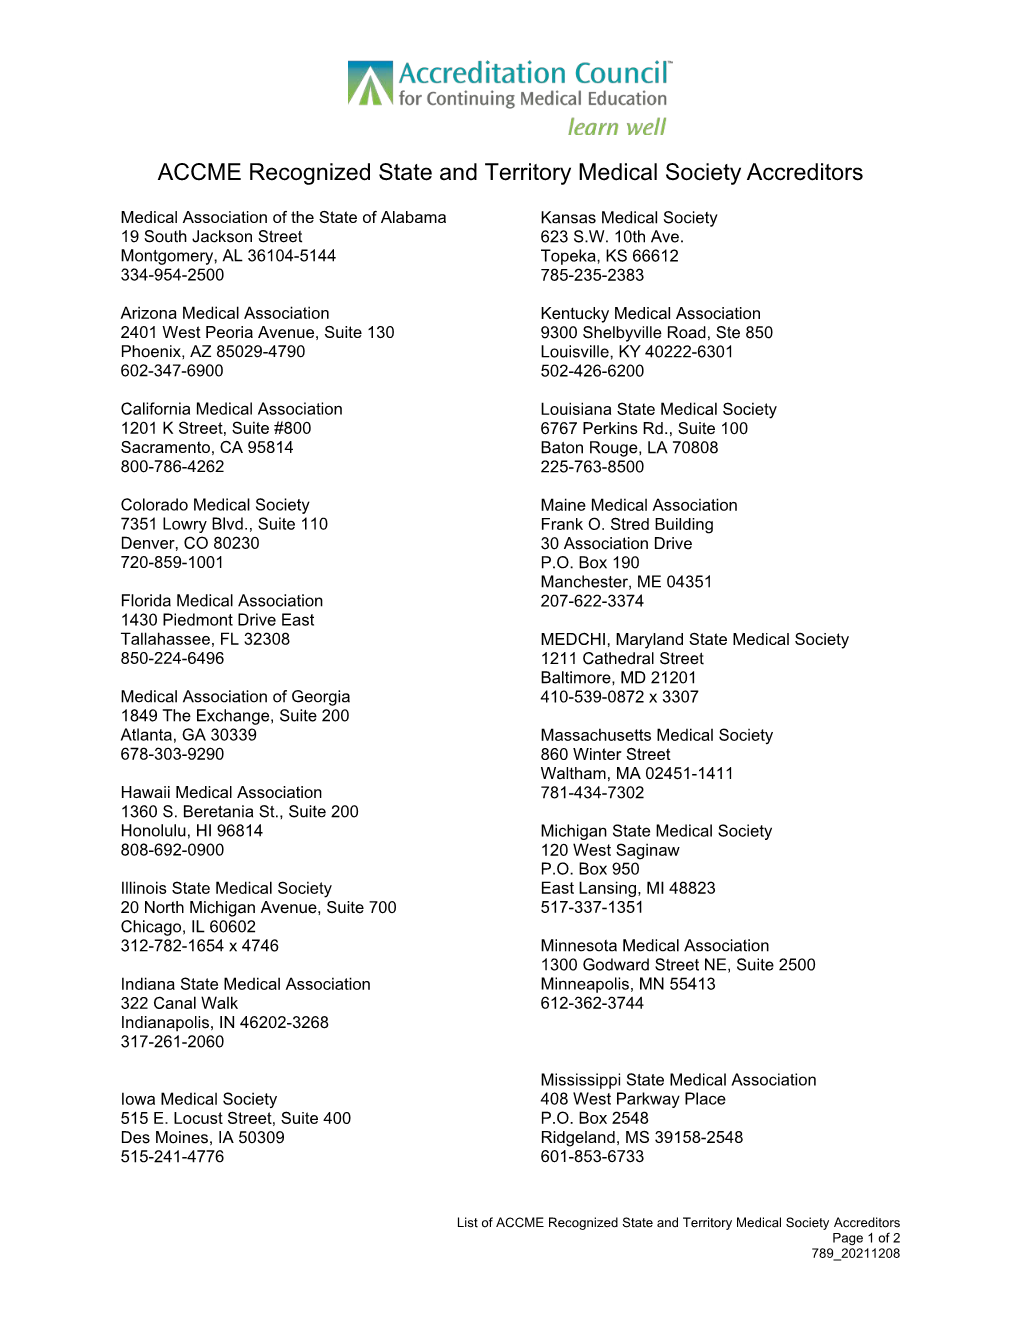 ACCME Recognized State and Territory Medical Society Accreditors